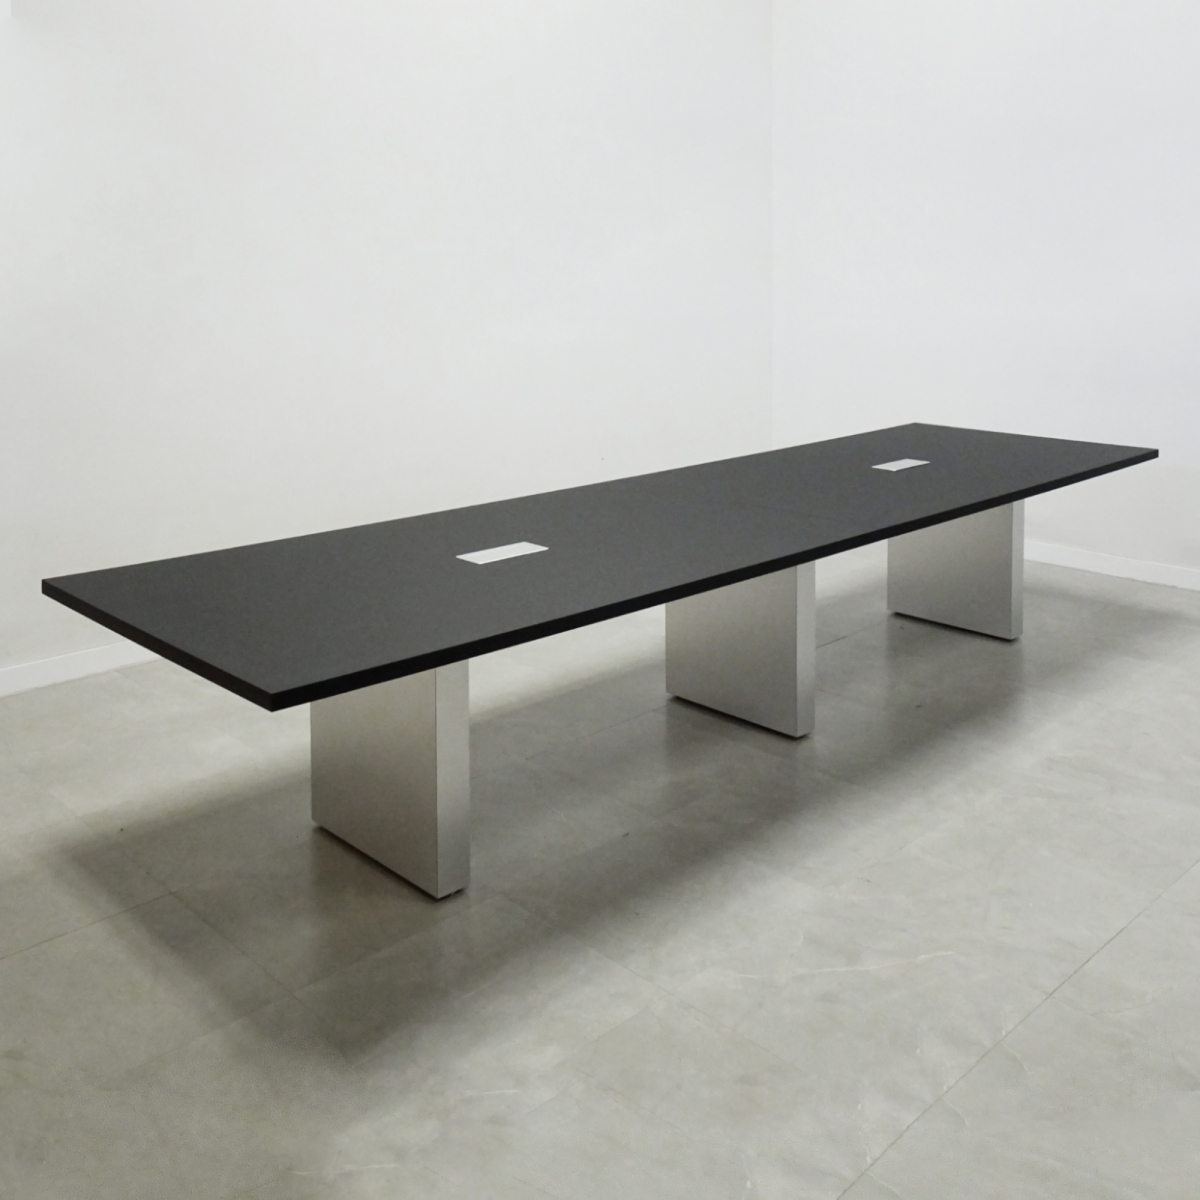 144 In. Axis Black Rectangular Table- Stock #1001-D